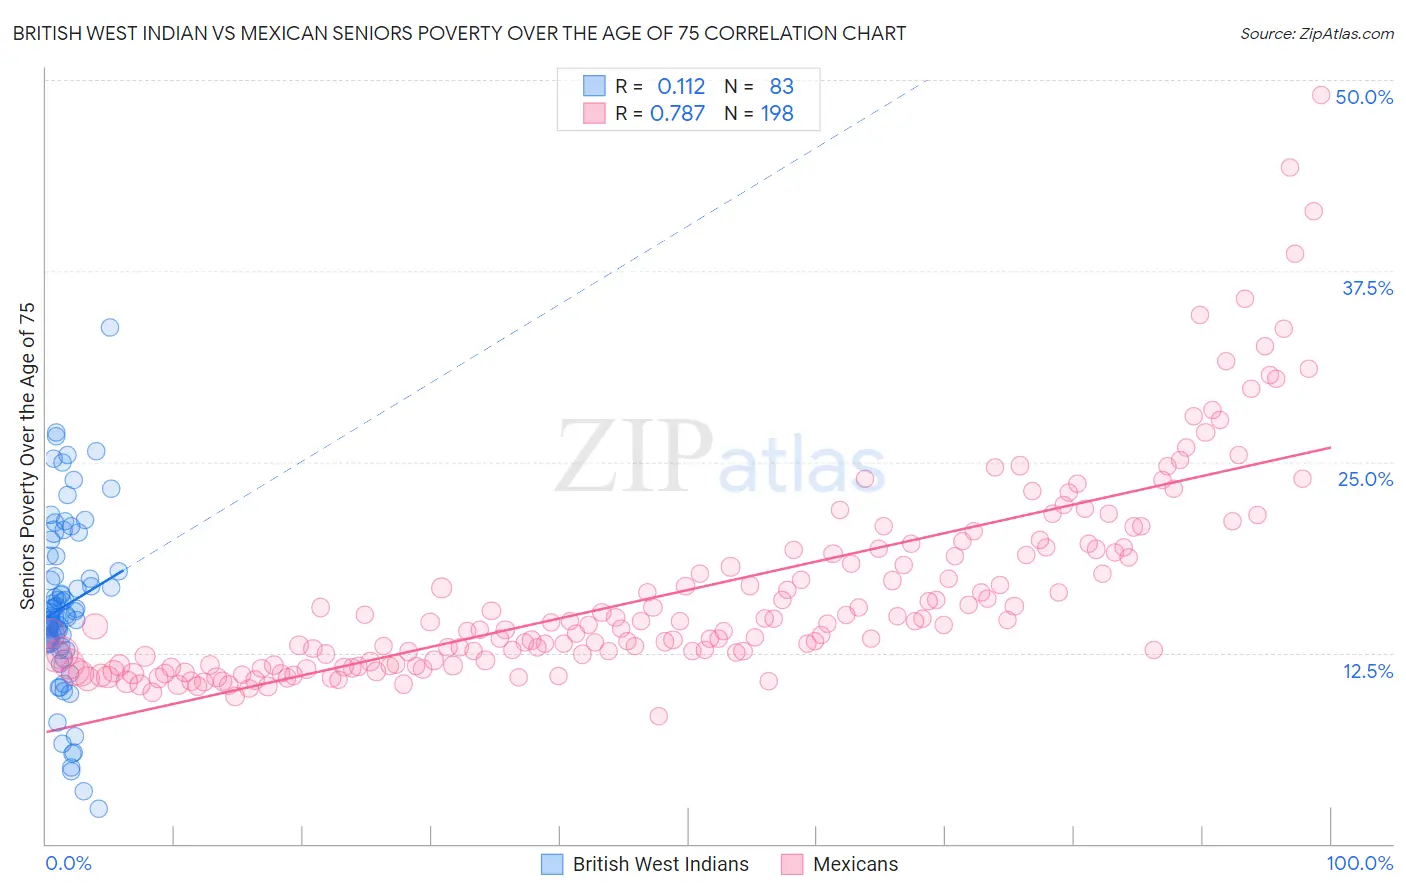 British West Indian vs Mexican Seniors Poverty Over the Age of 75